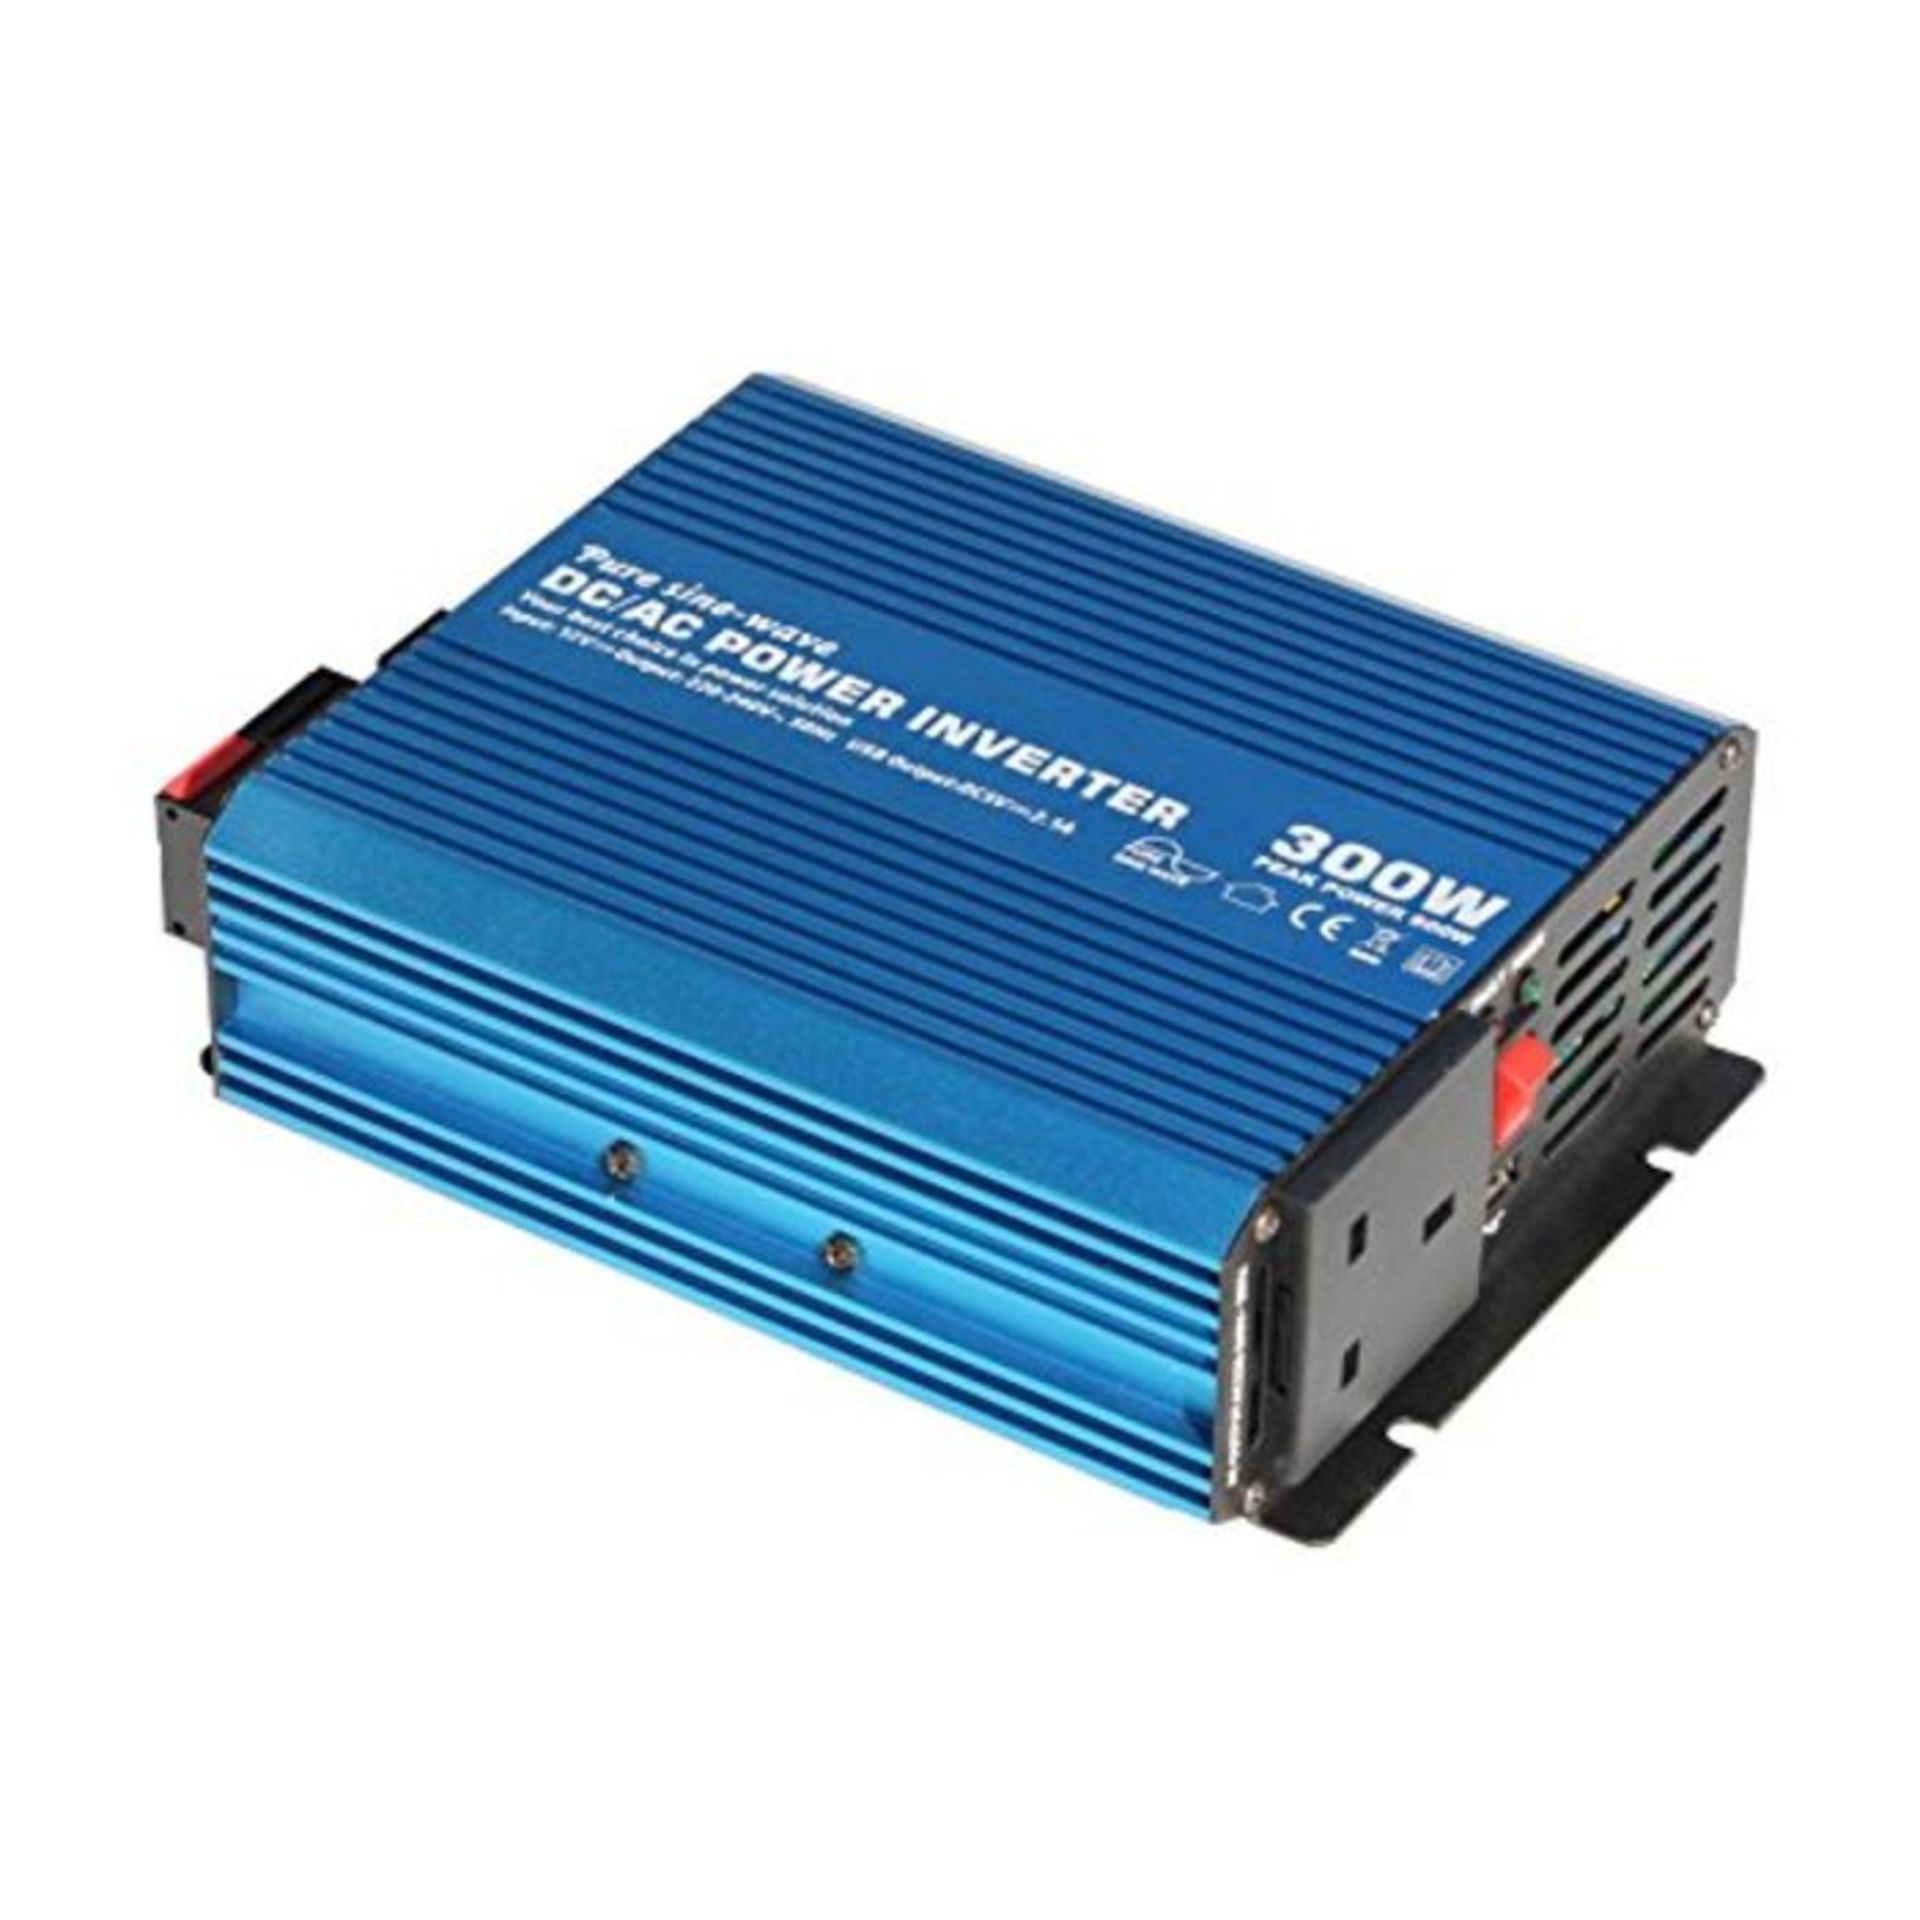 RRP £72.00 300W 12V pure sine wave power inverter 230V AC output (UK socket), with powerful USB p